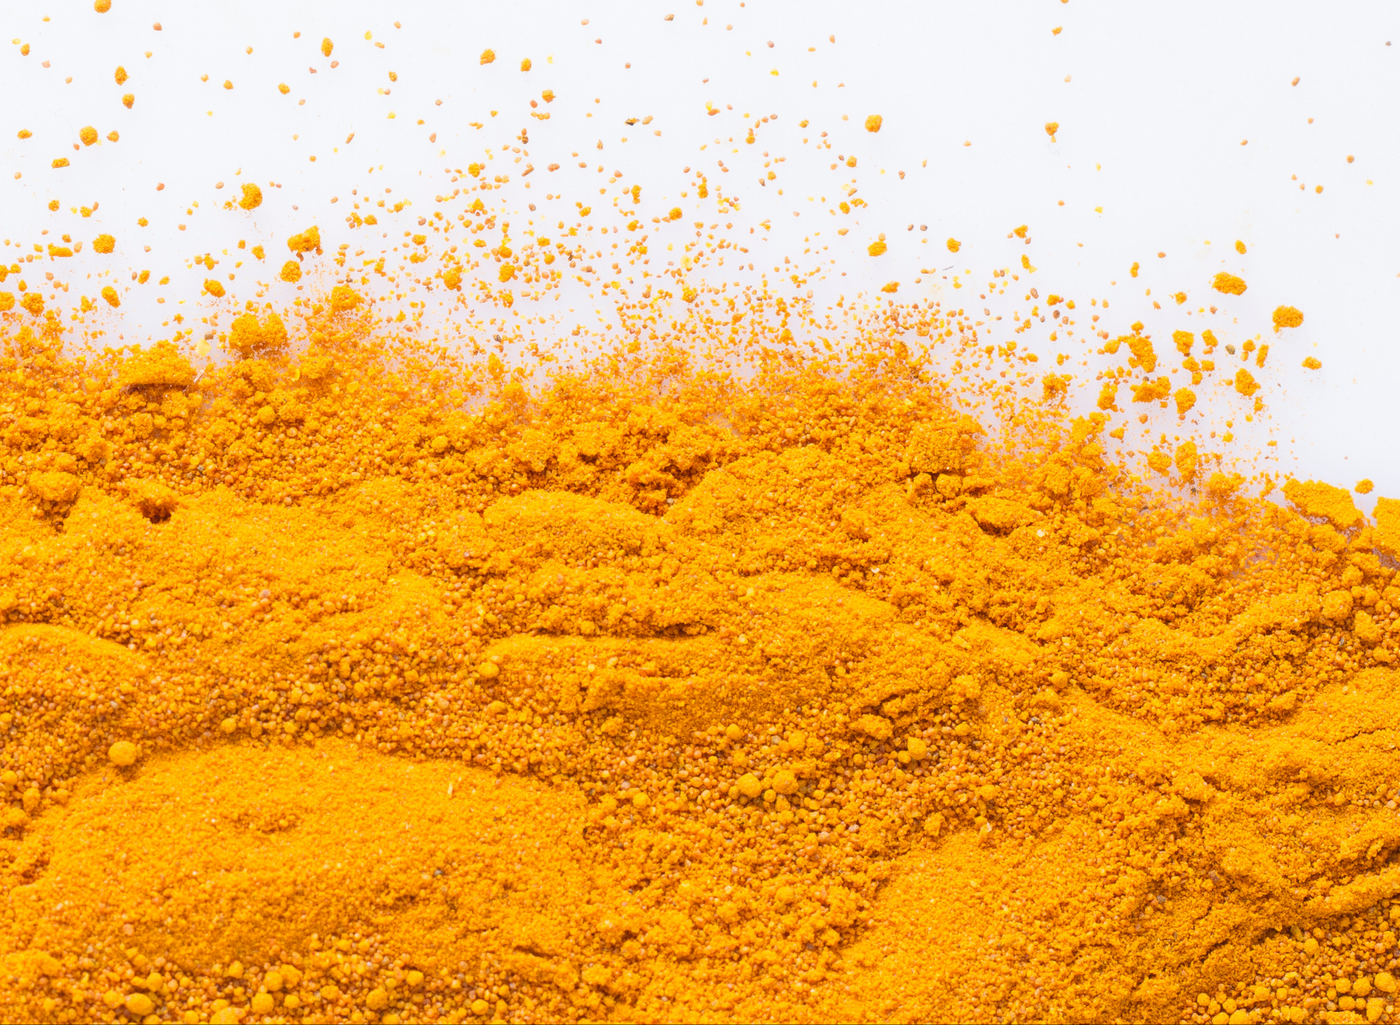 Getting your daily turmeric is simple and surprisingly delicious